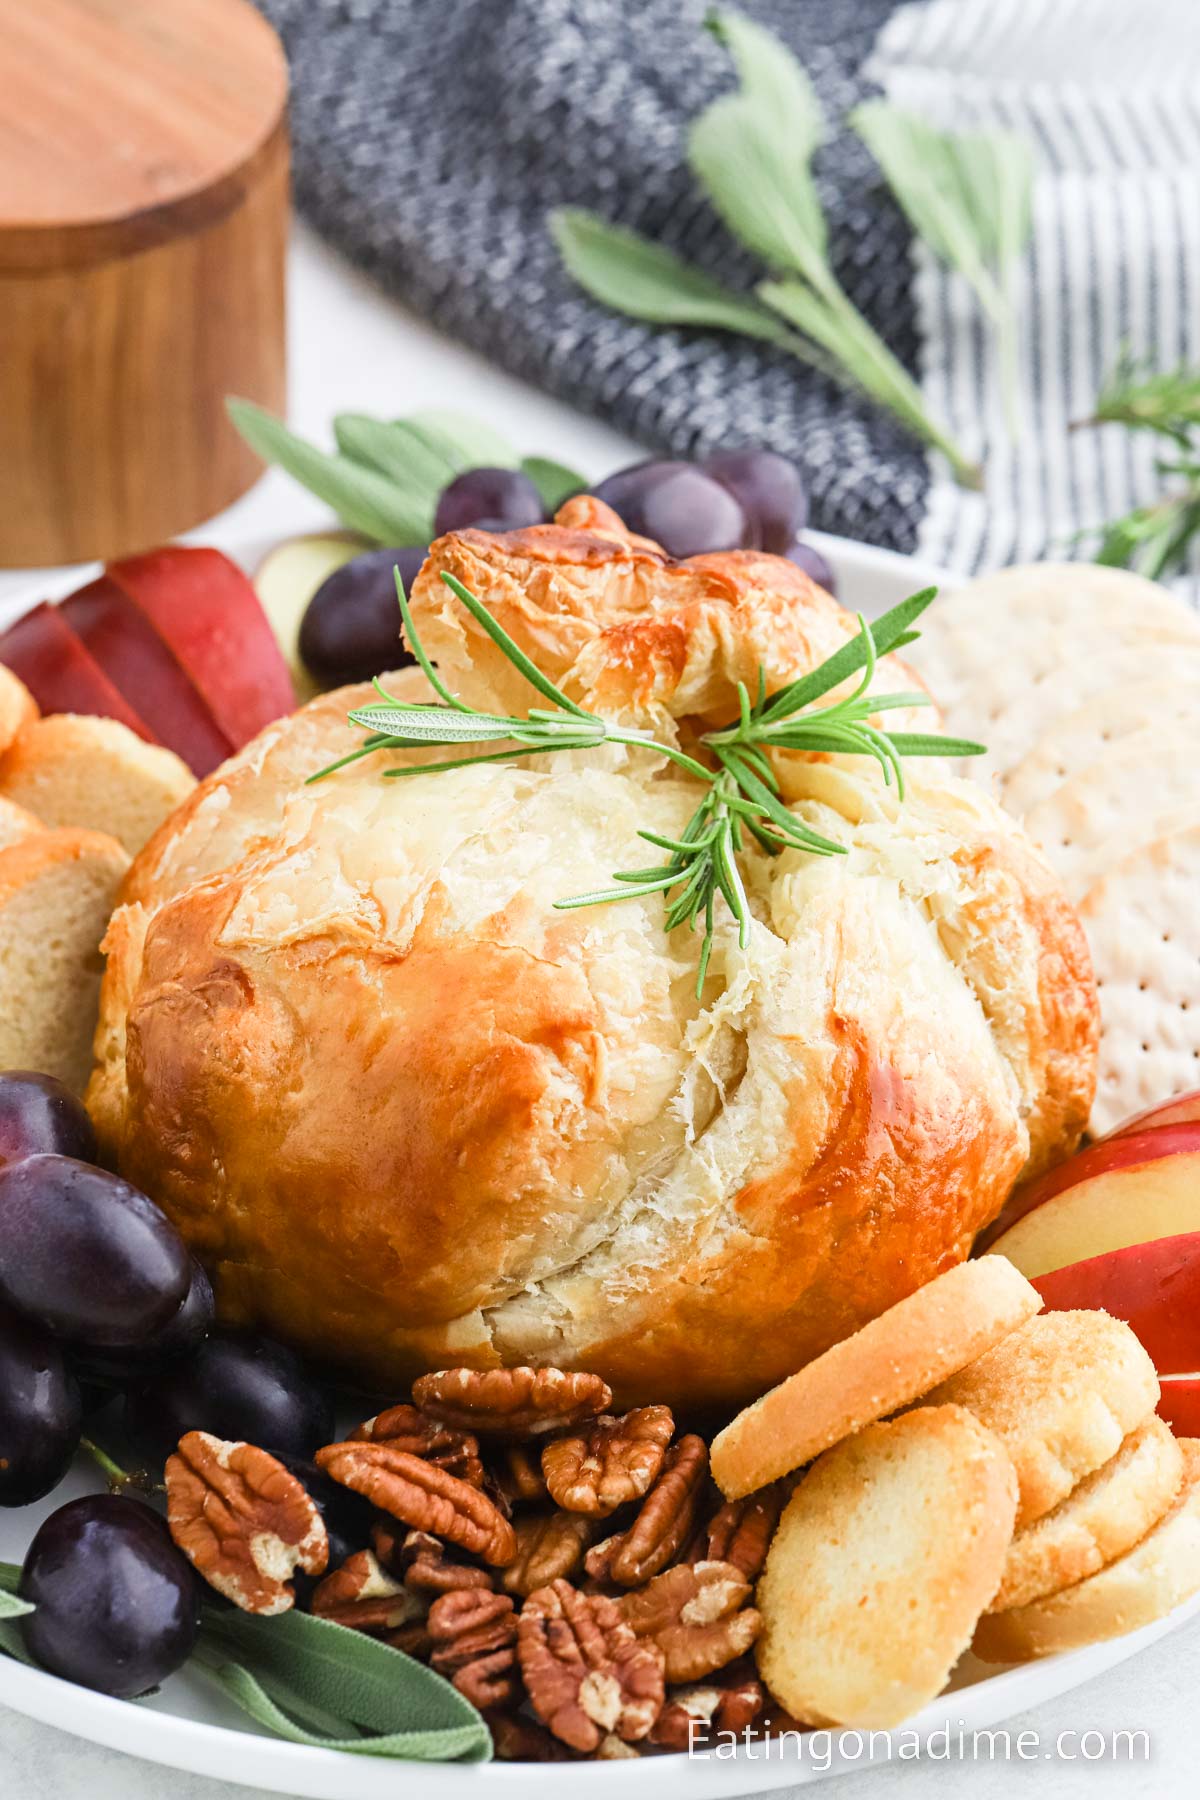 Baked brie in puff pastry on a platter with sides of grapes, crackers and bread